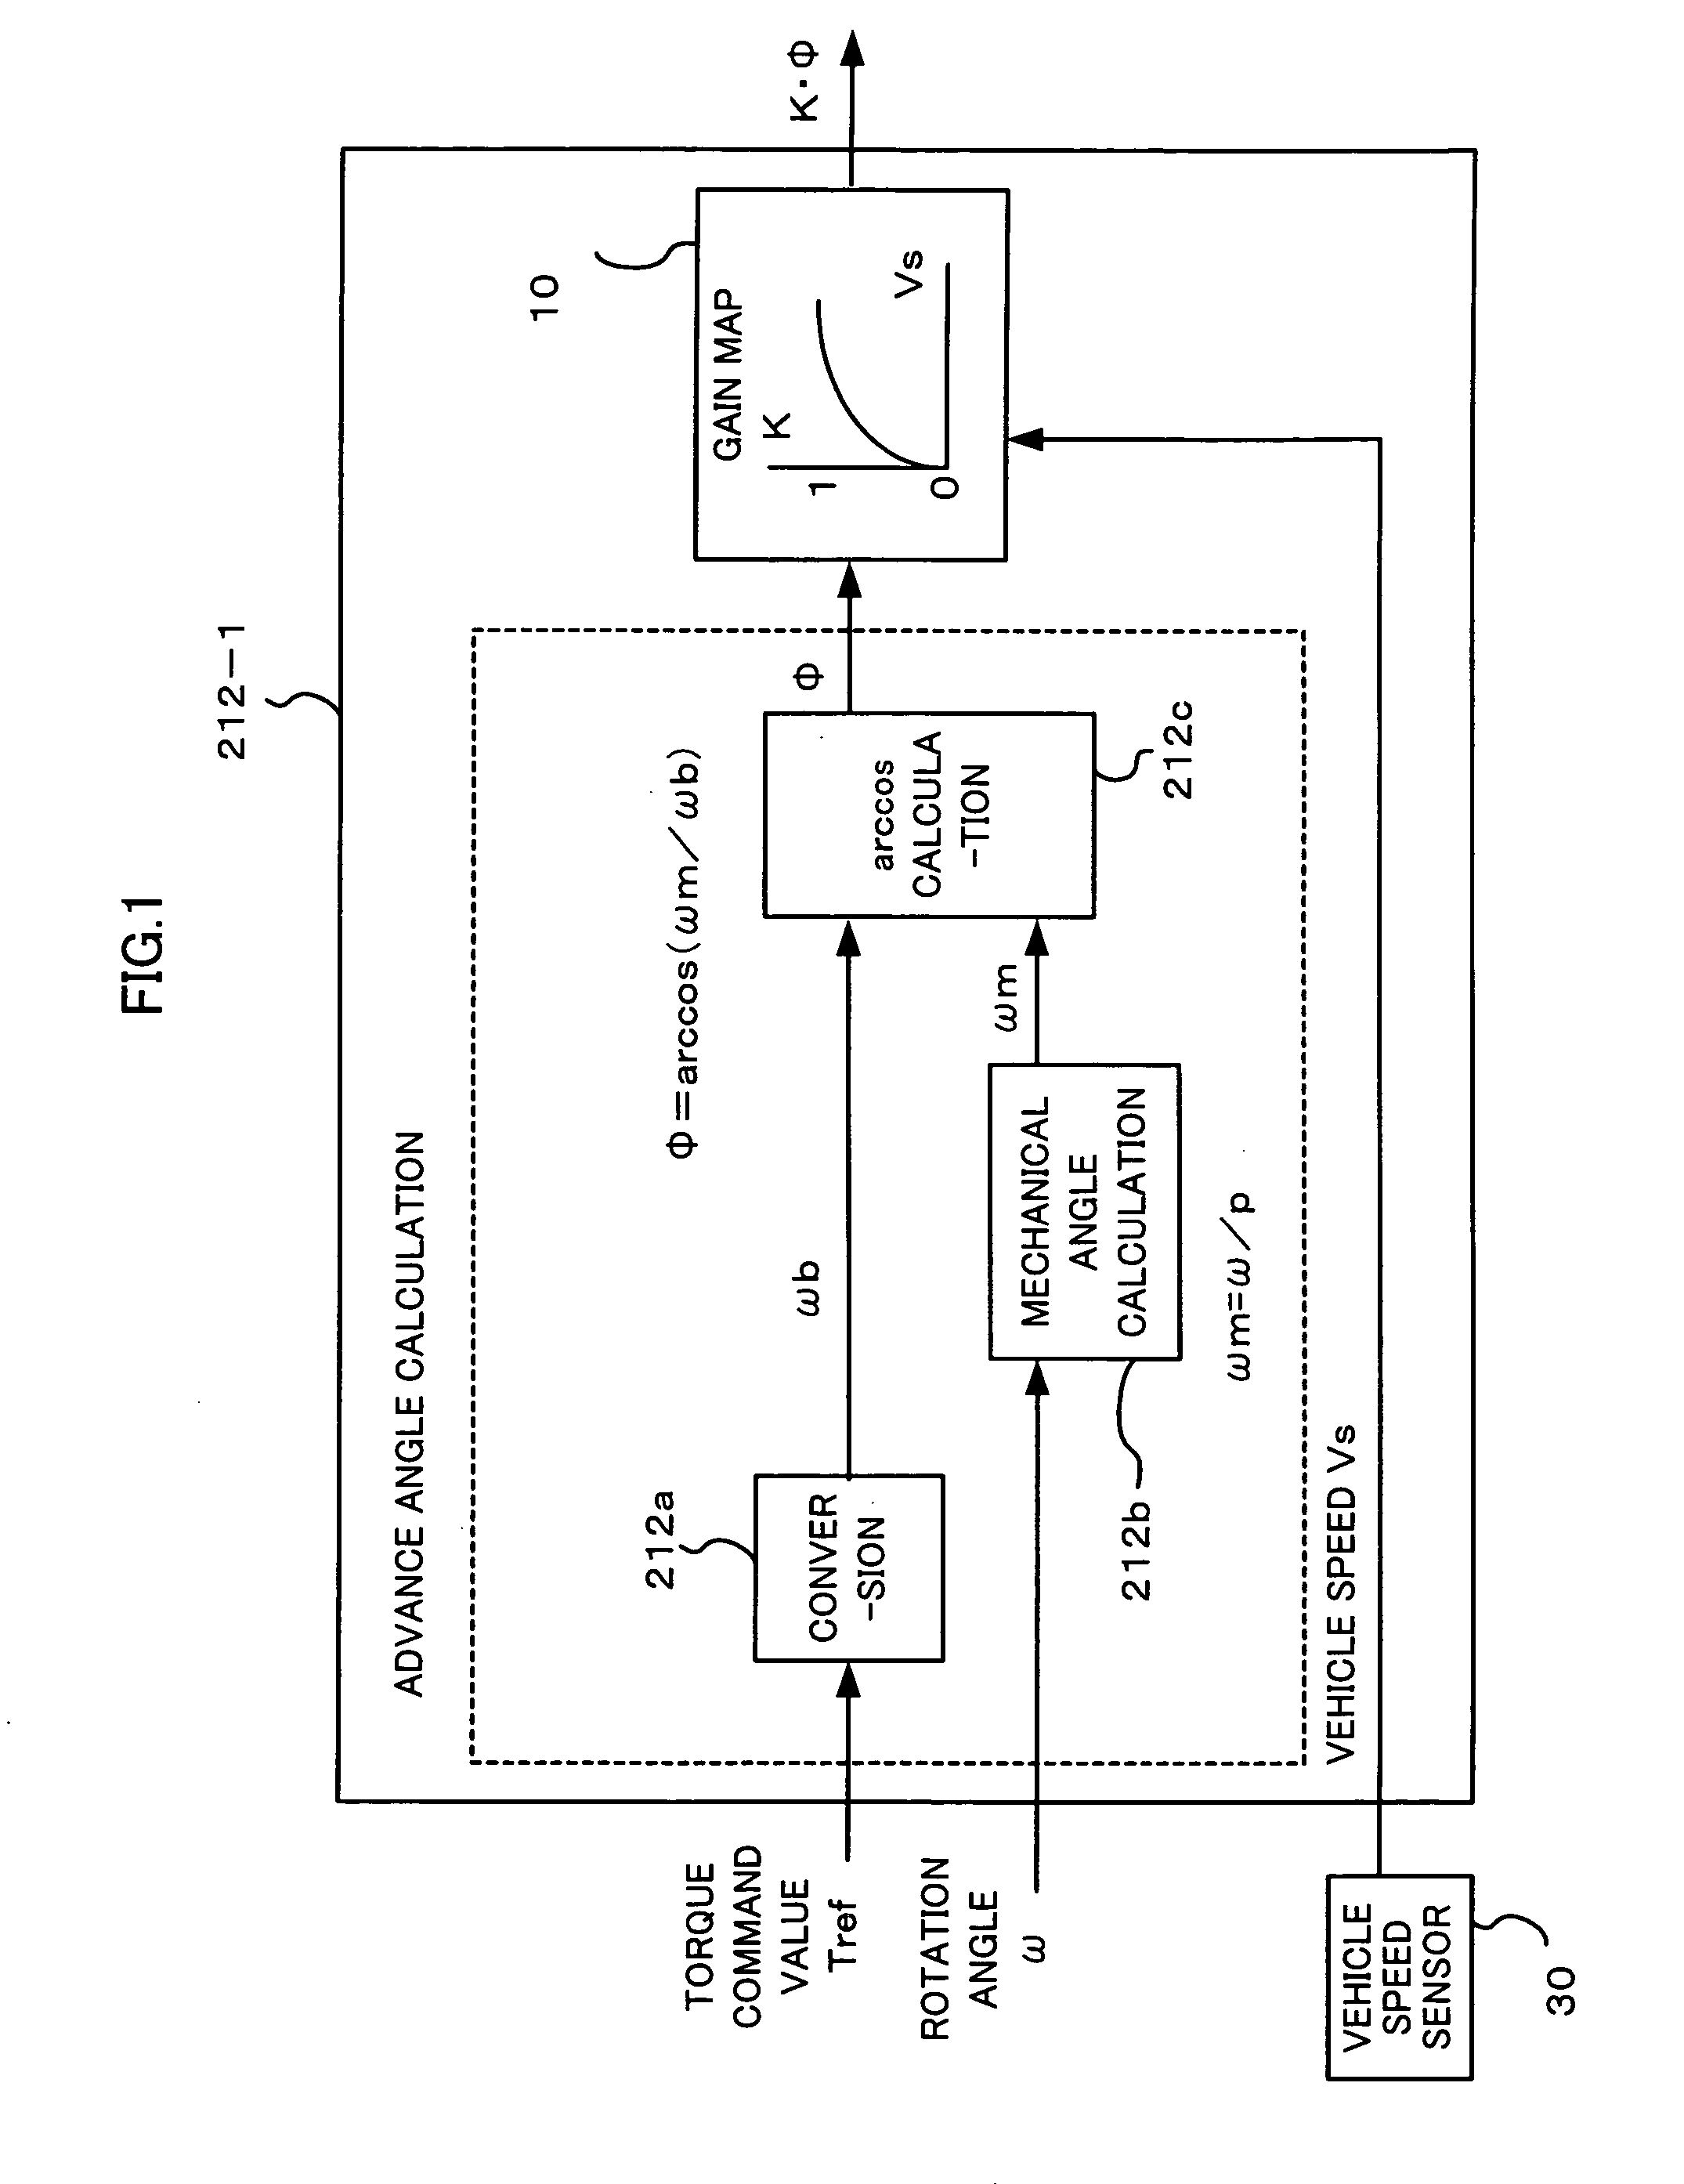 Control unit for elctric power steering apparatus